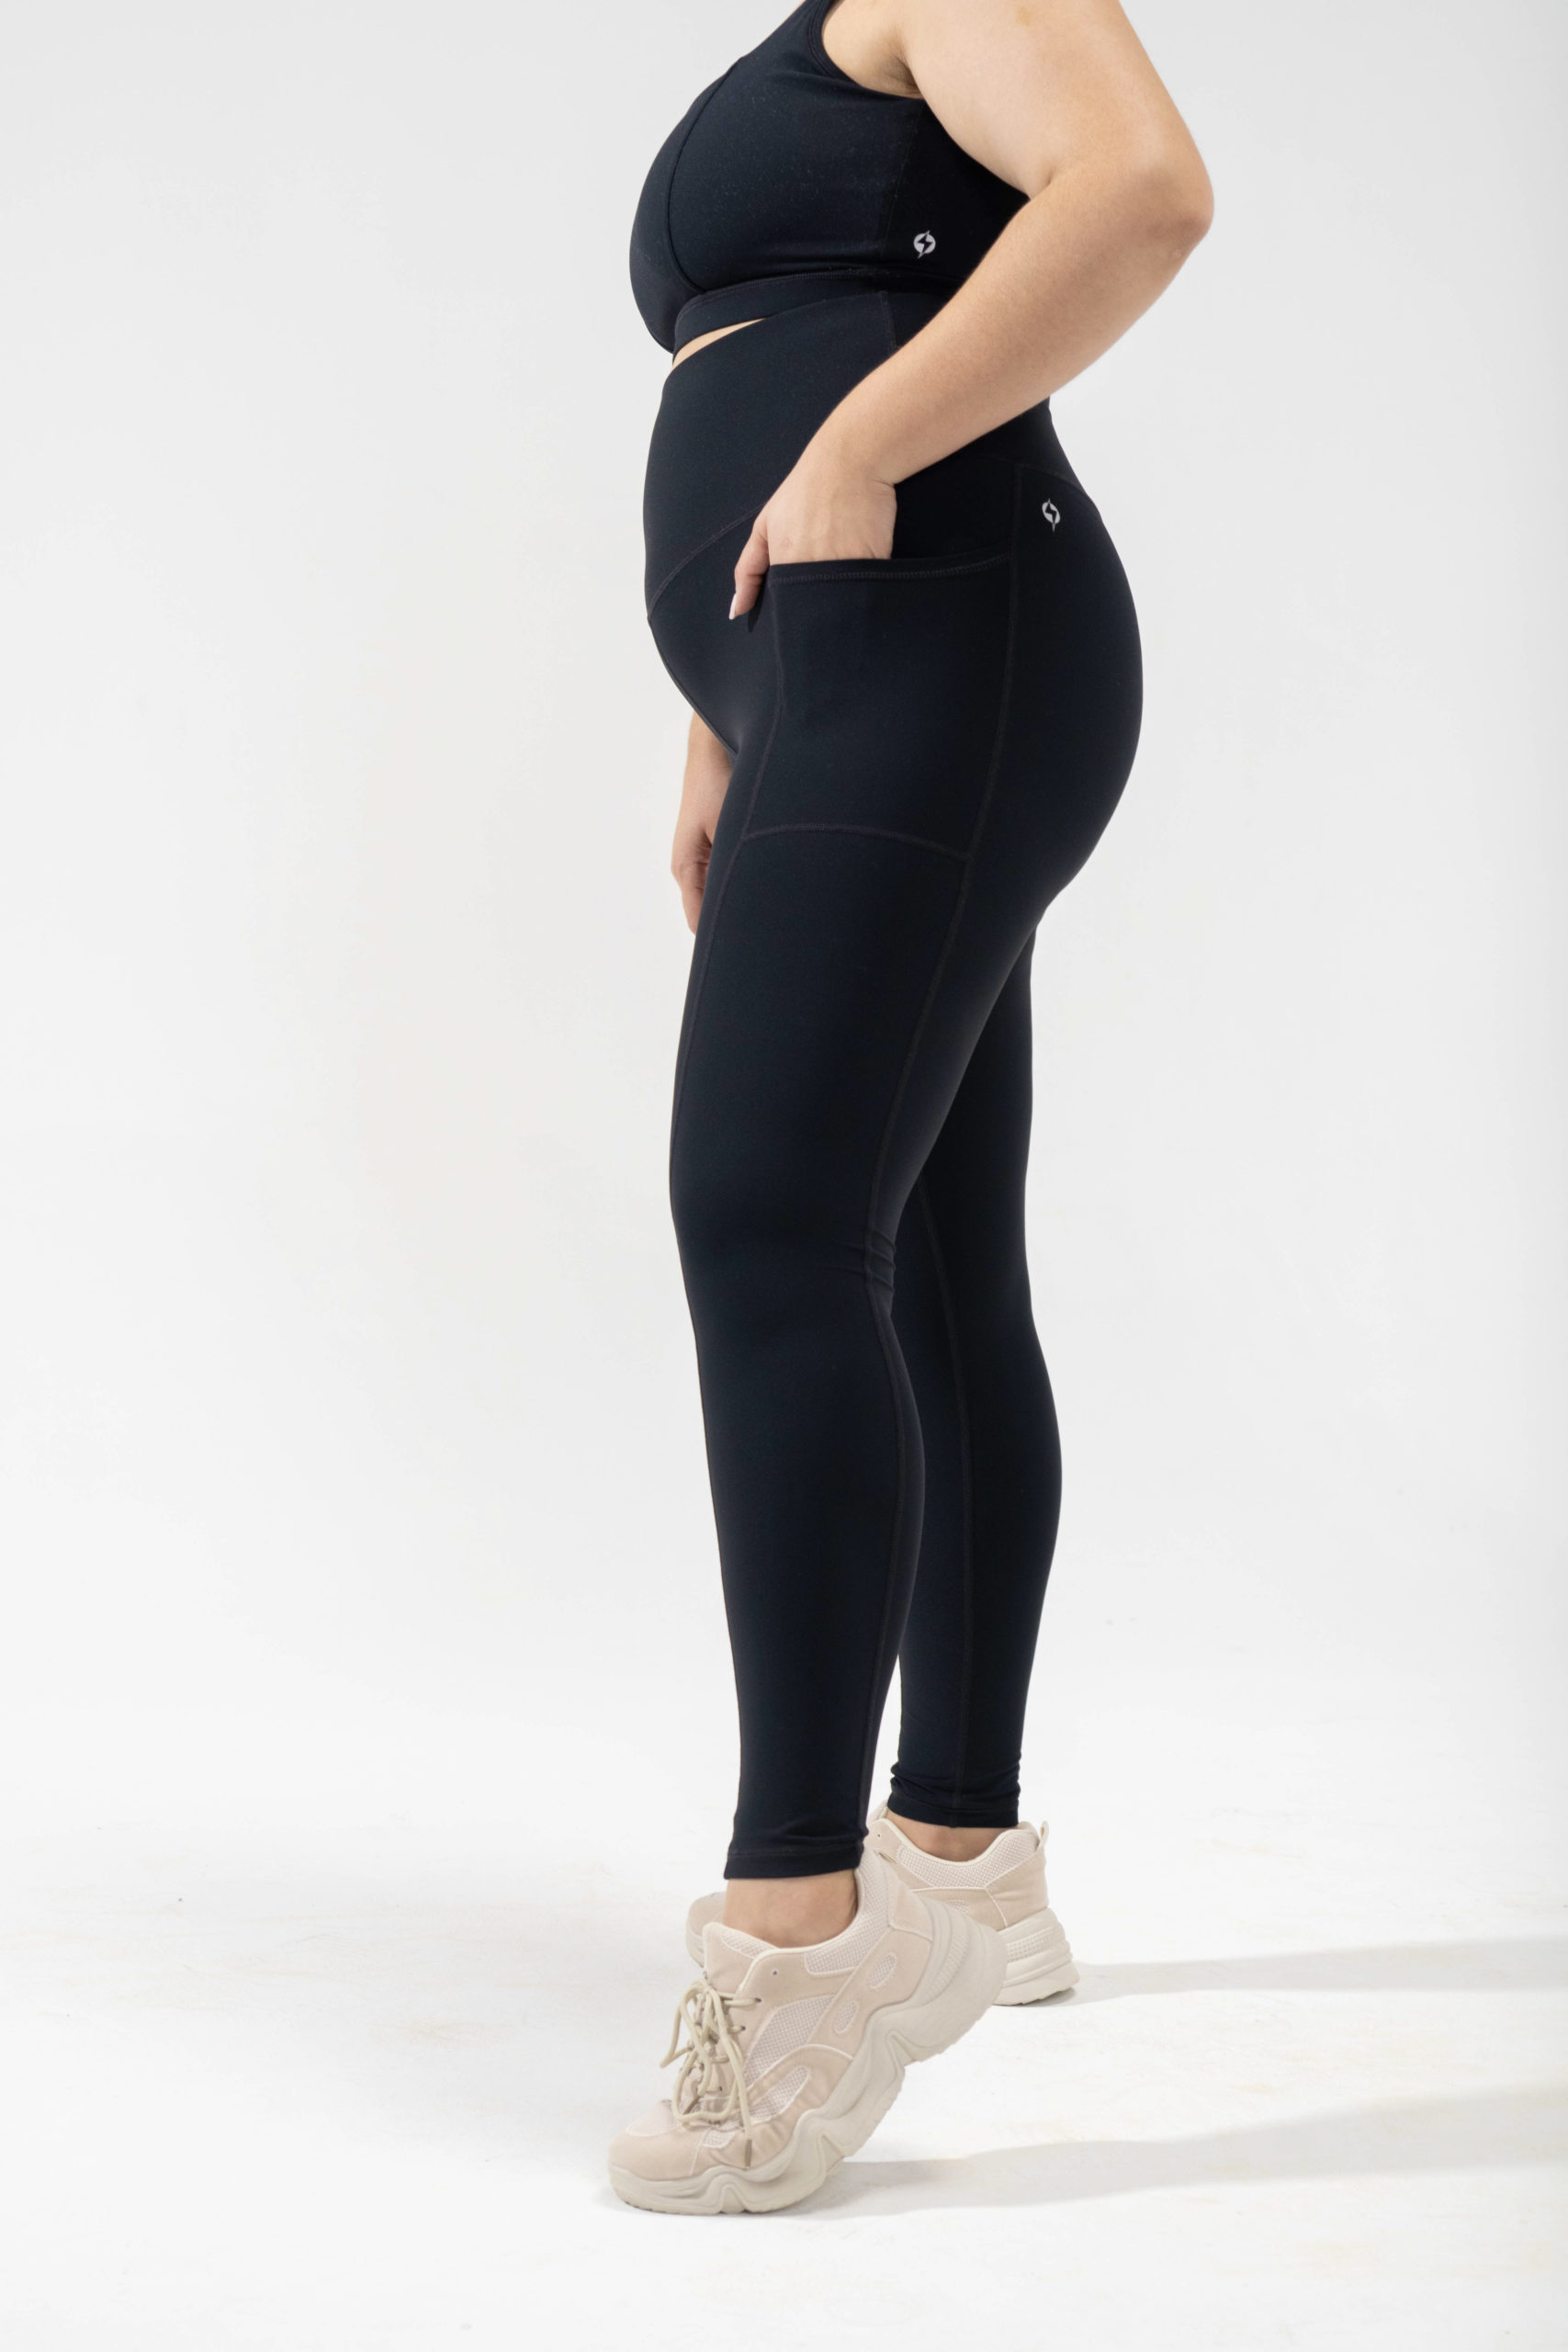 popflex timeless tights in black with pockets